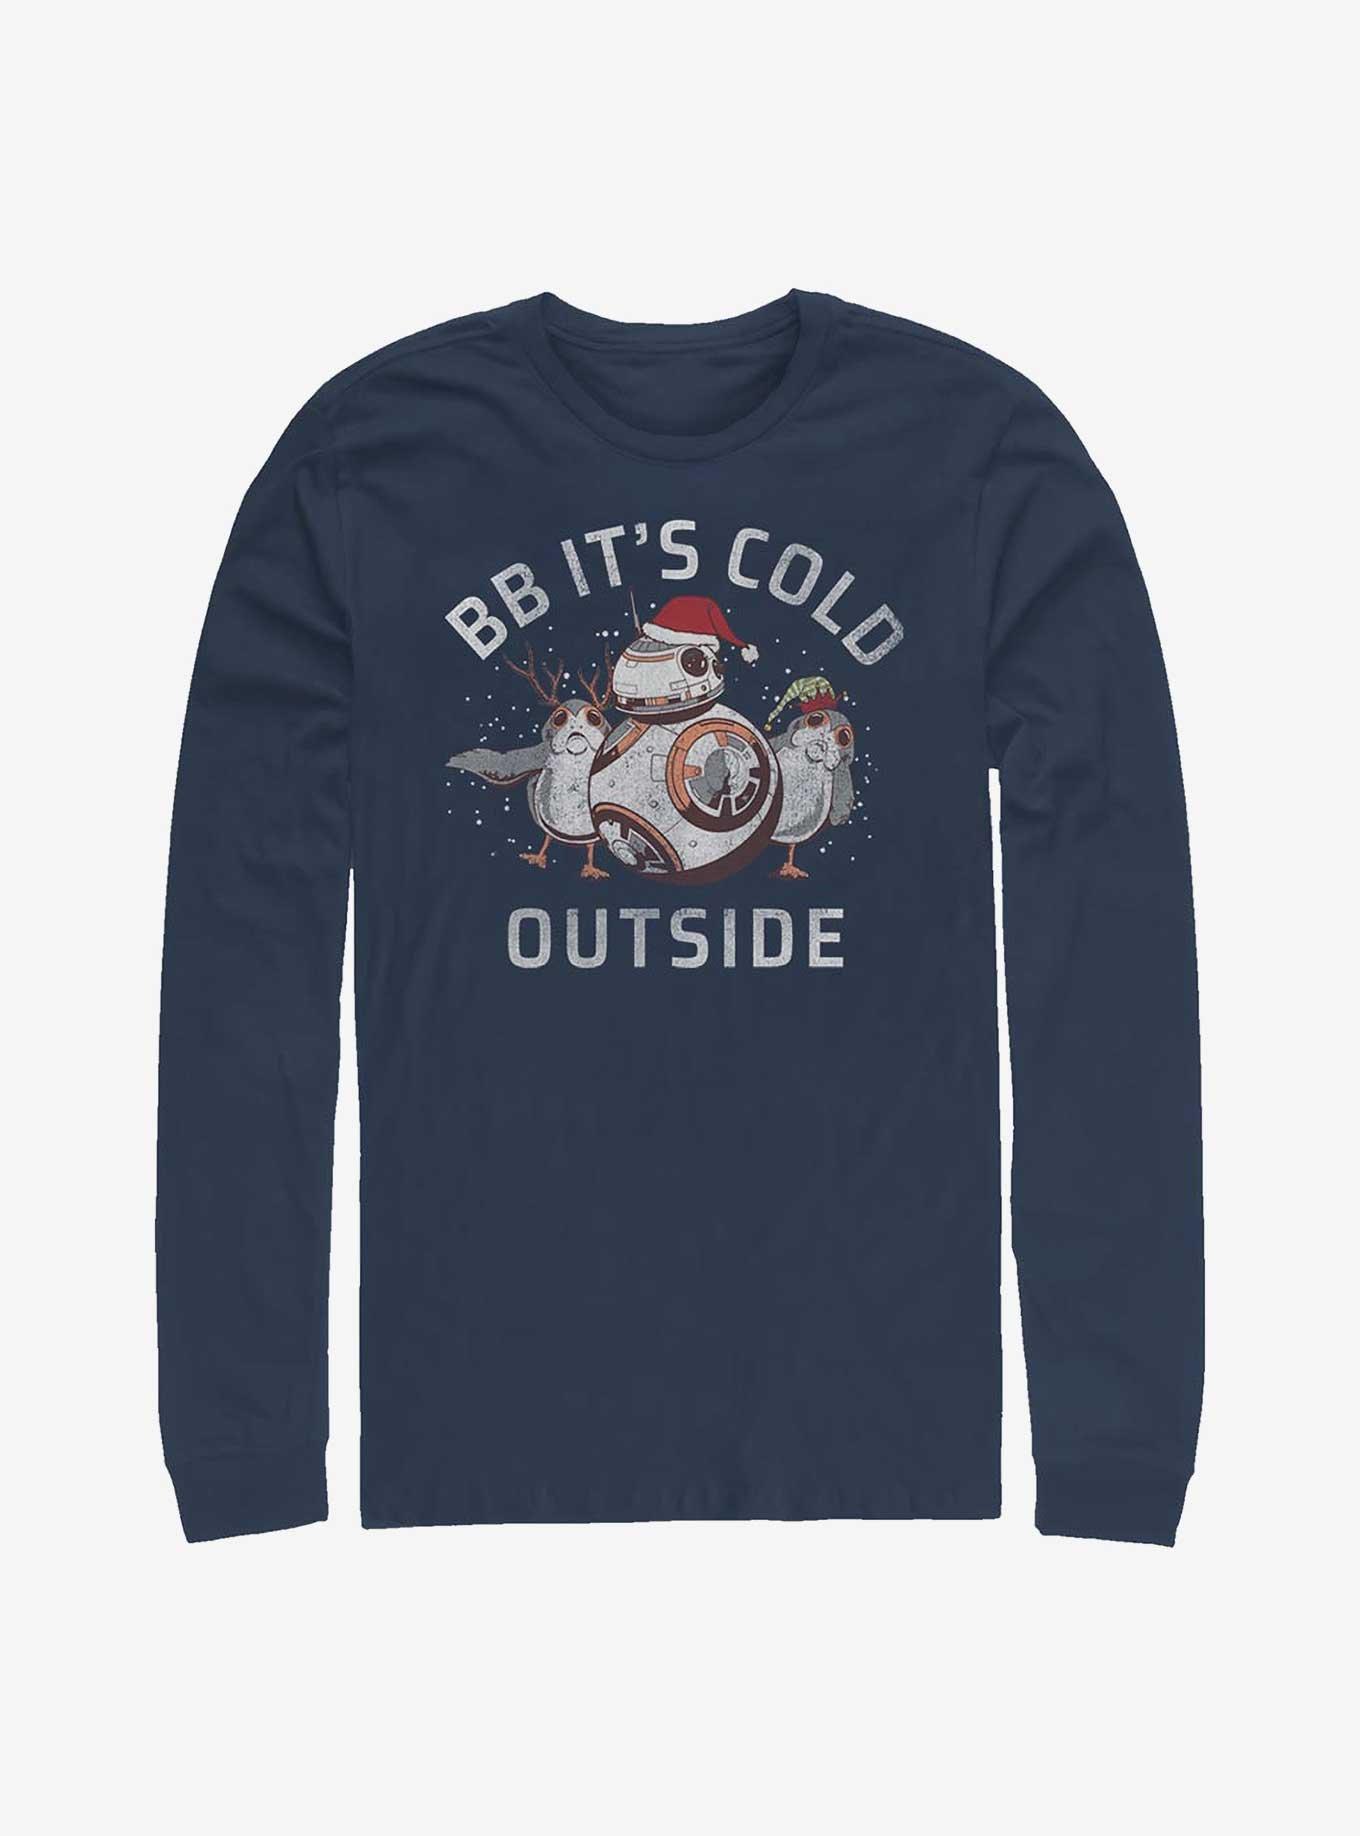 Star Wars BB It's Cold Outside Long-Sleeve T-Shirt, NAVY, hi-res